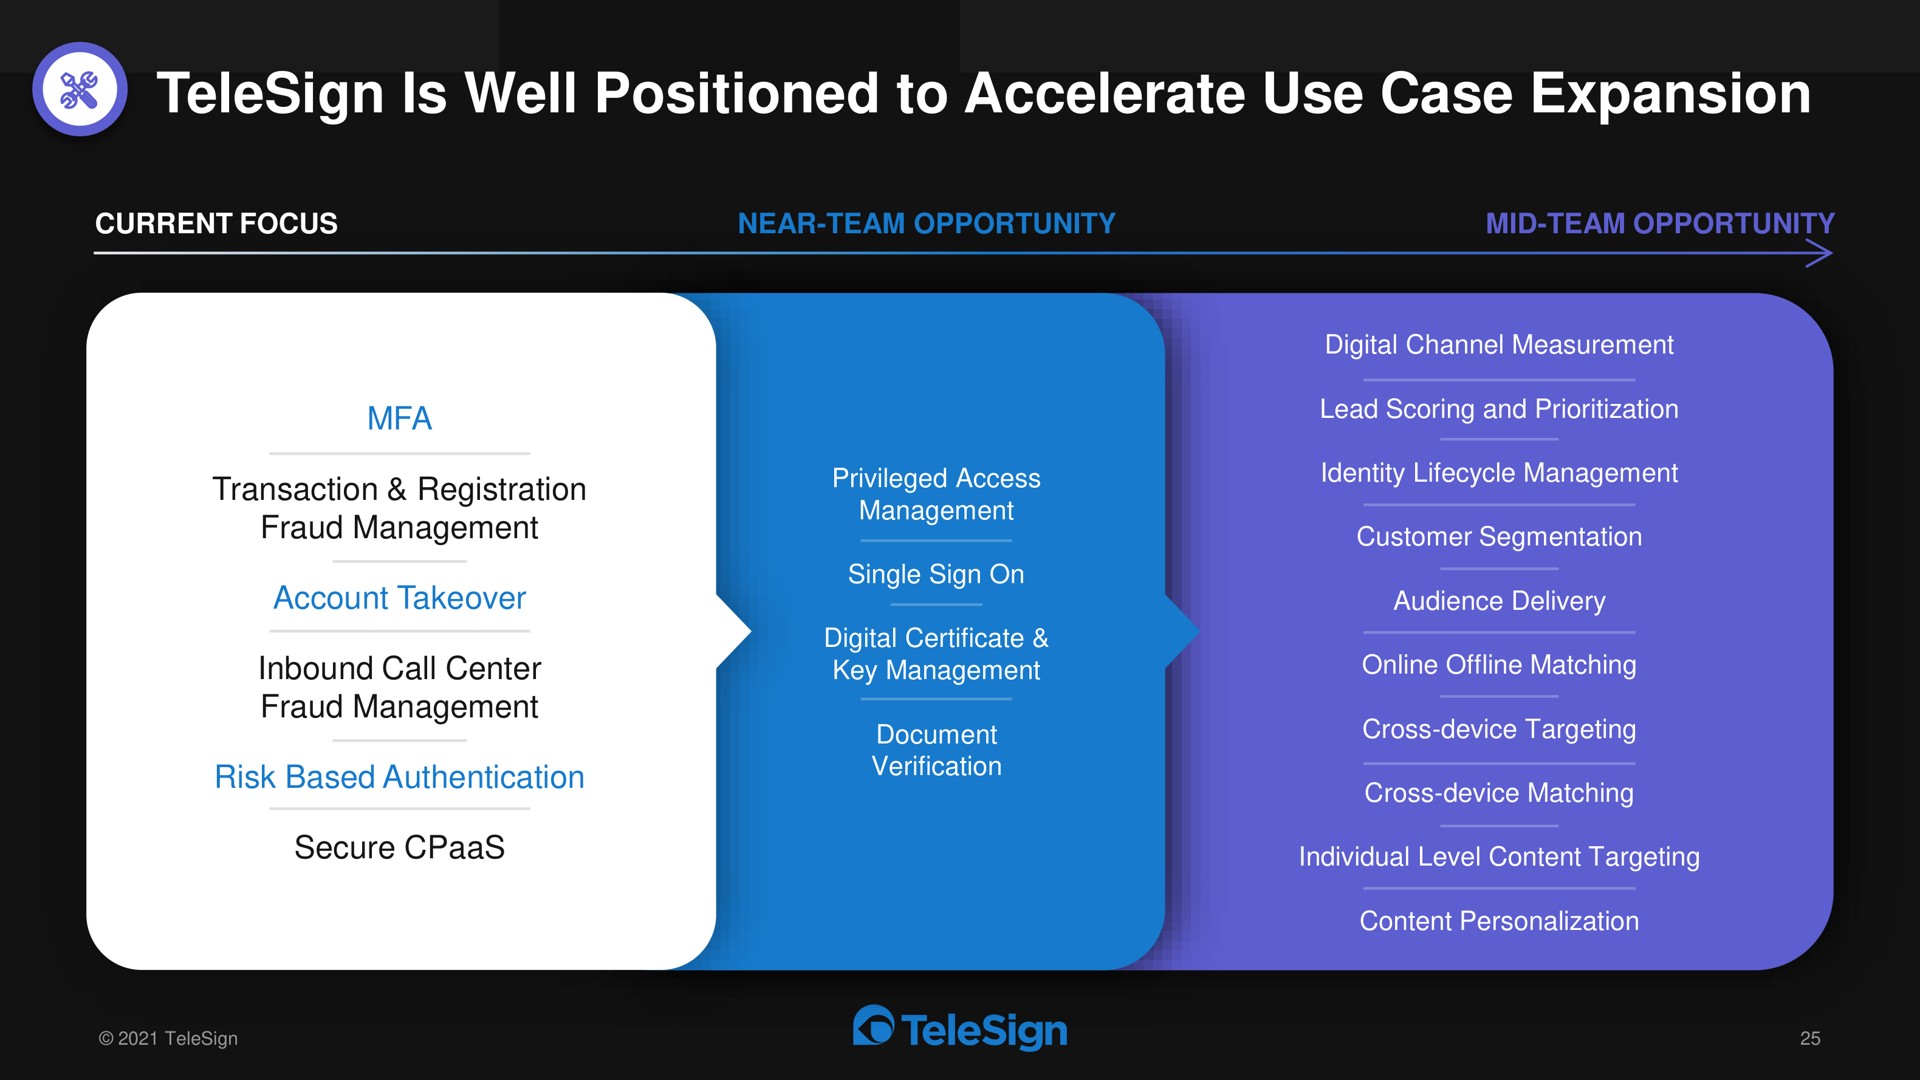 is well positioned to accelerate use case expansion | TeleSign